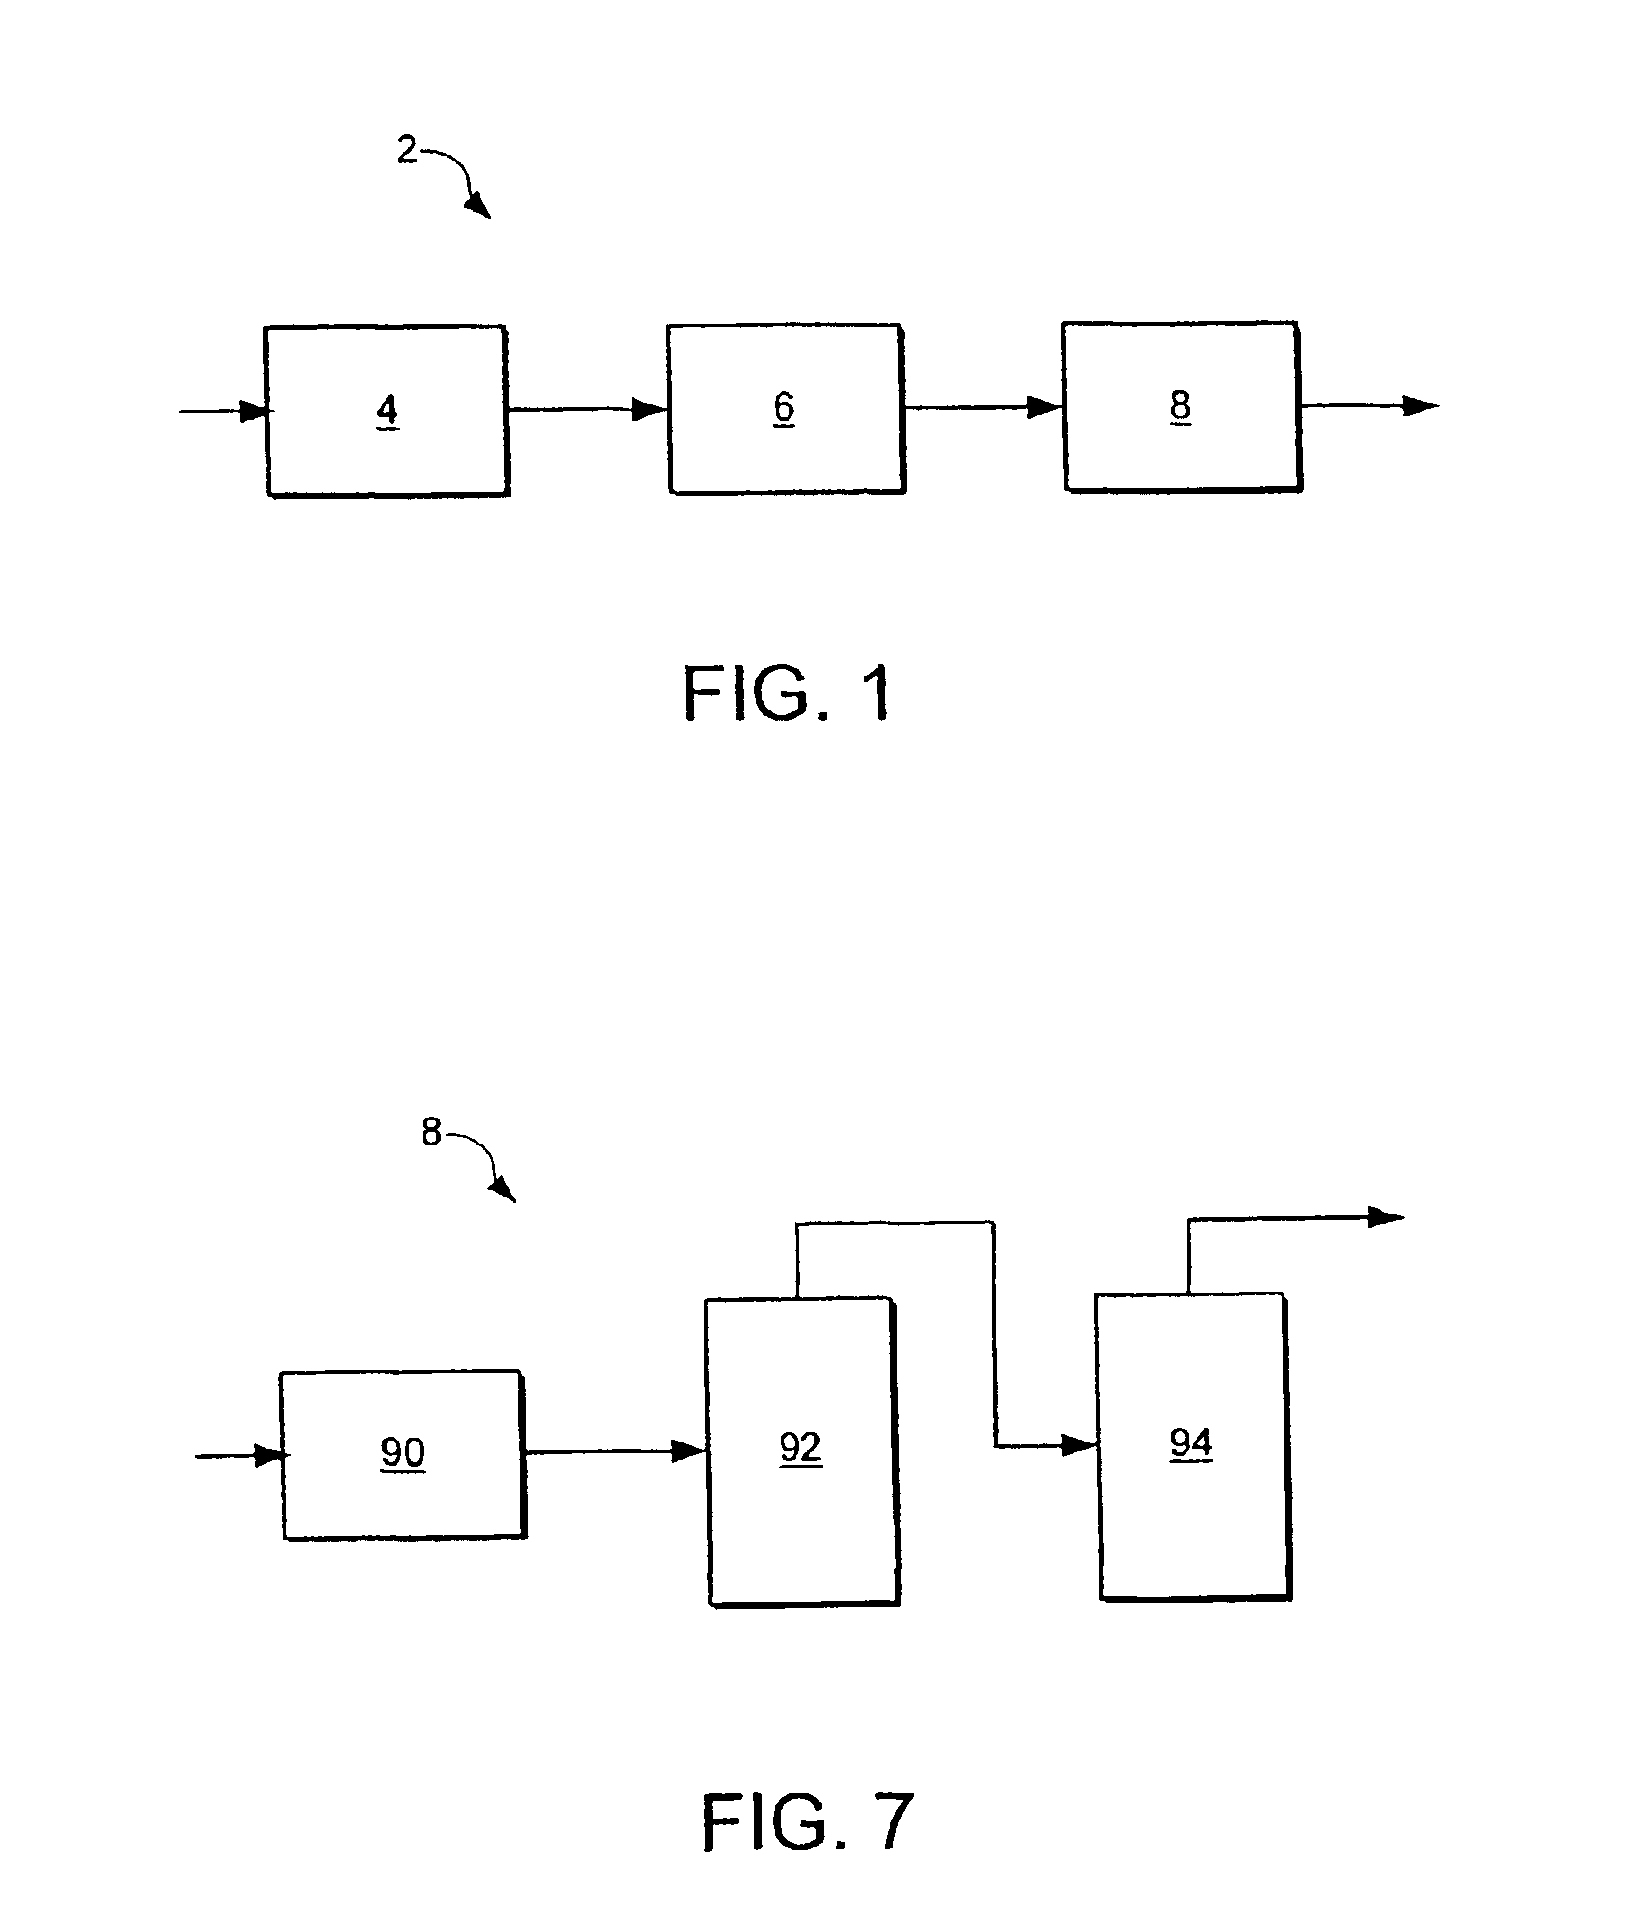 Process and apparatus for recovering sulphur from a gas stream containing hydrogen sulphide